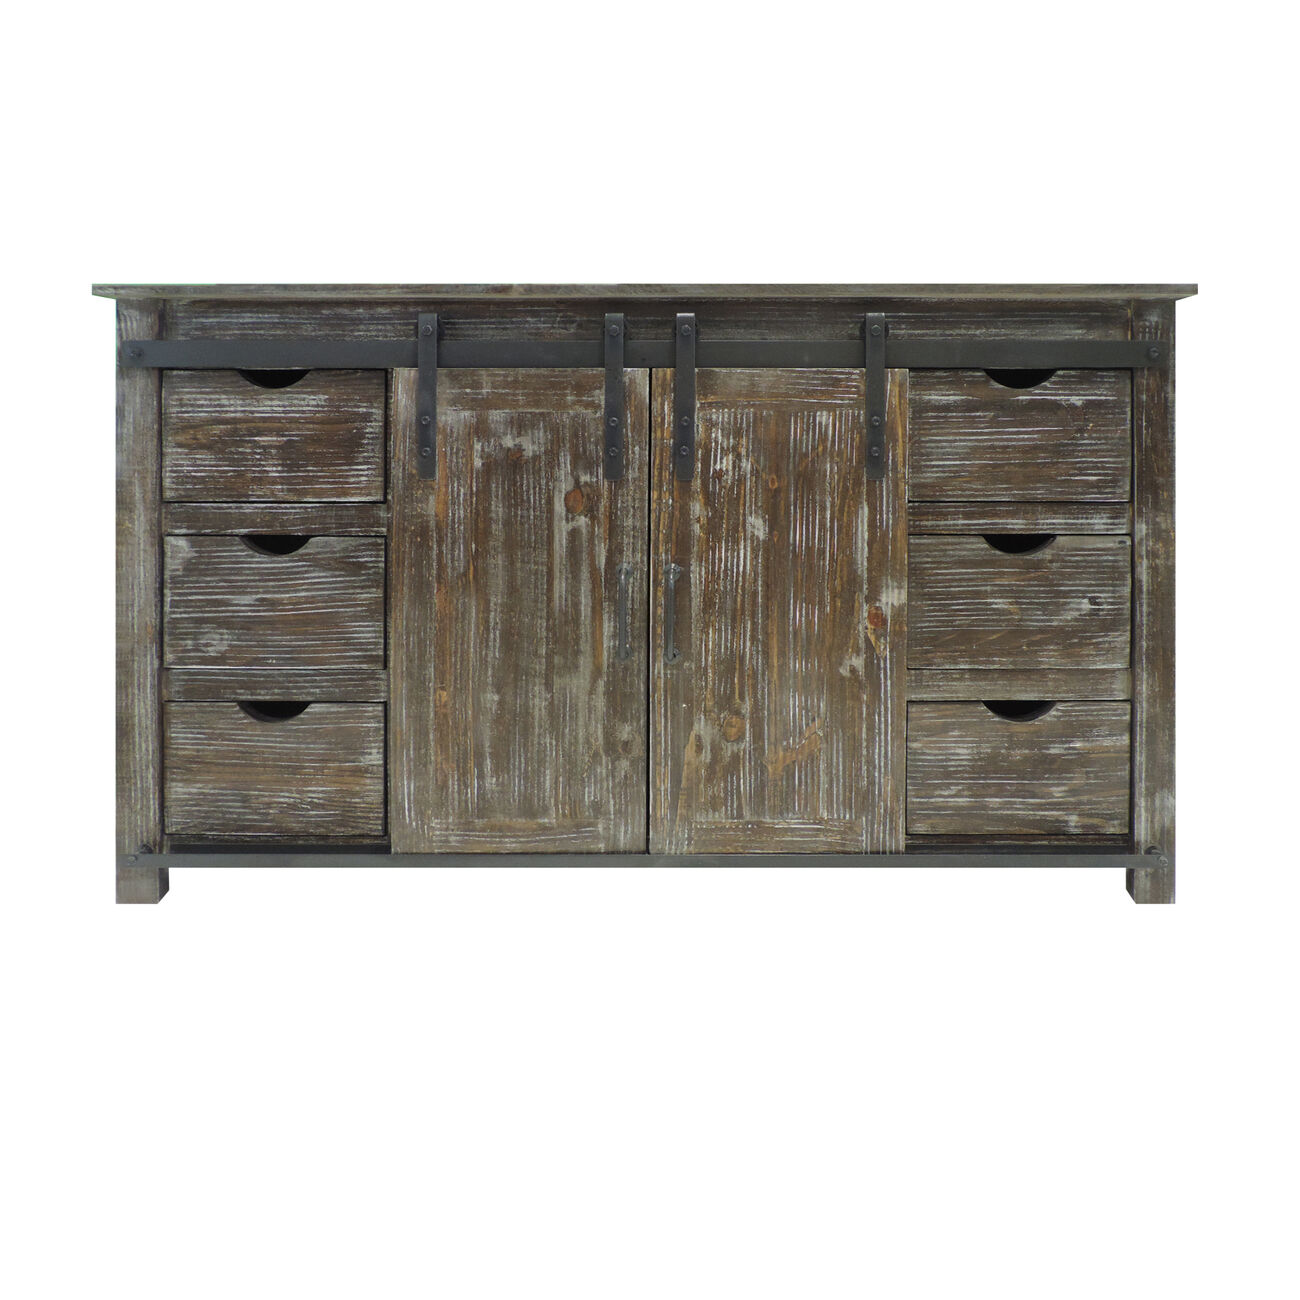 70 Inch Wooden Console with Barn Style Sliding Door Storage,Distressed Brown